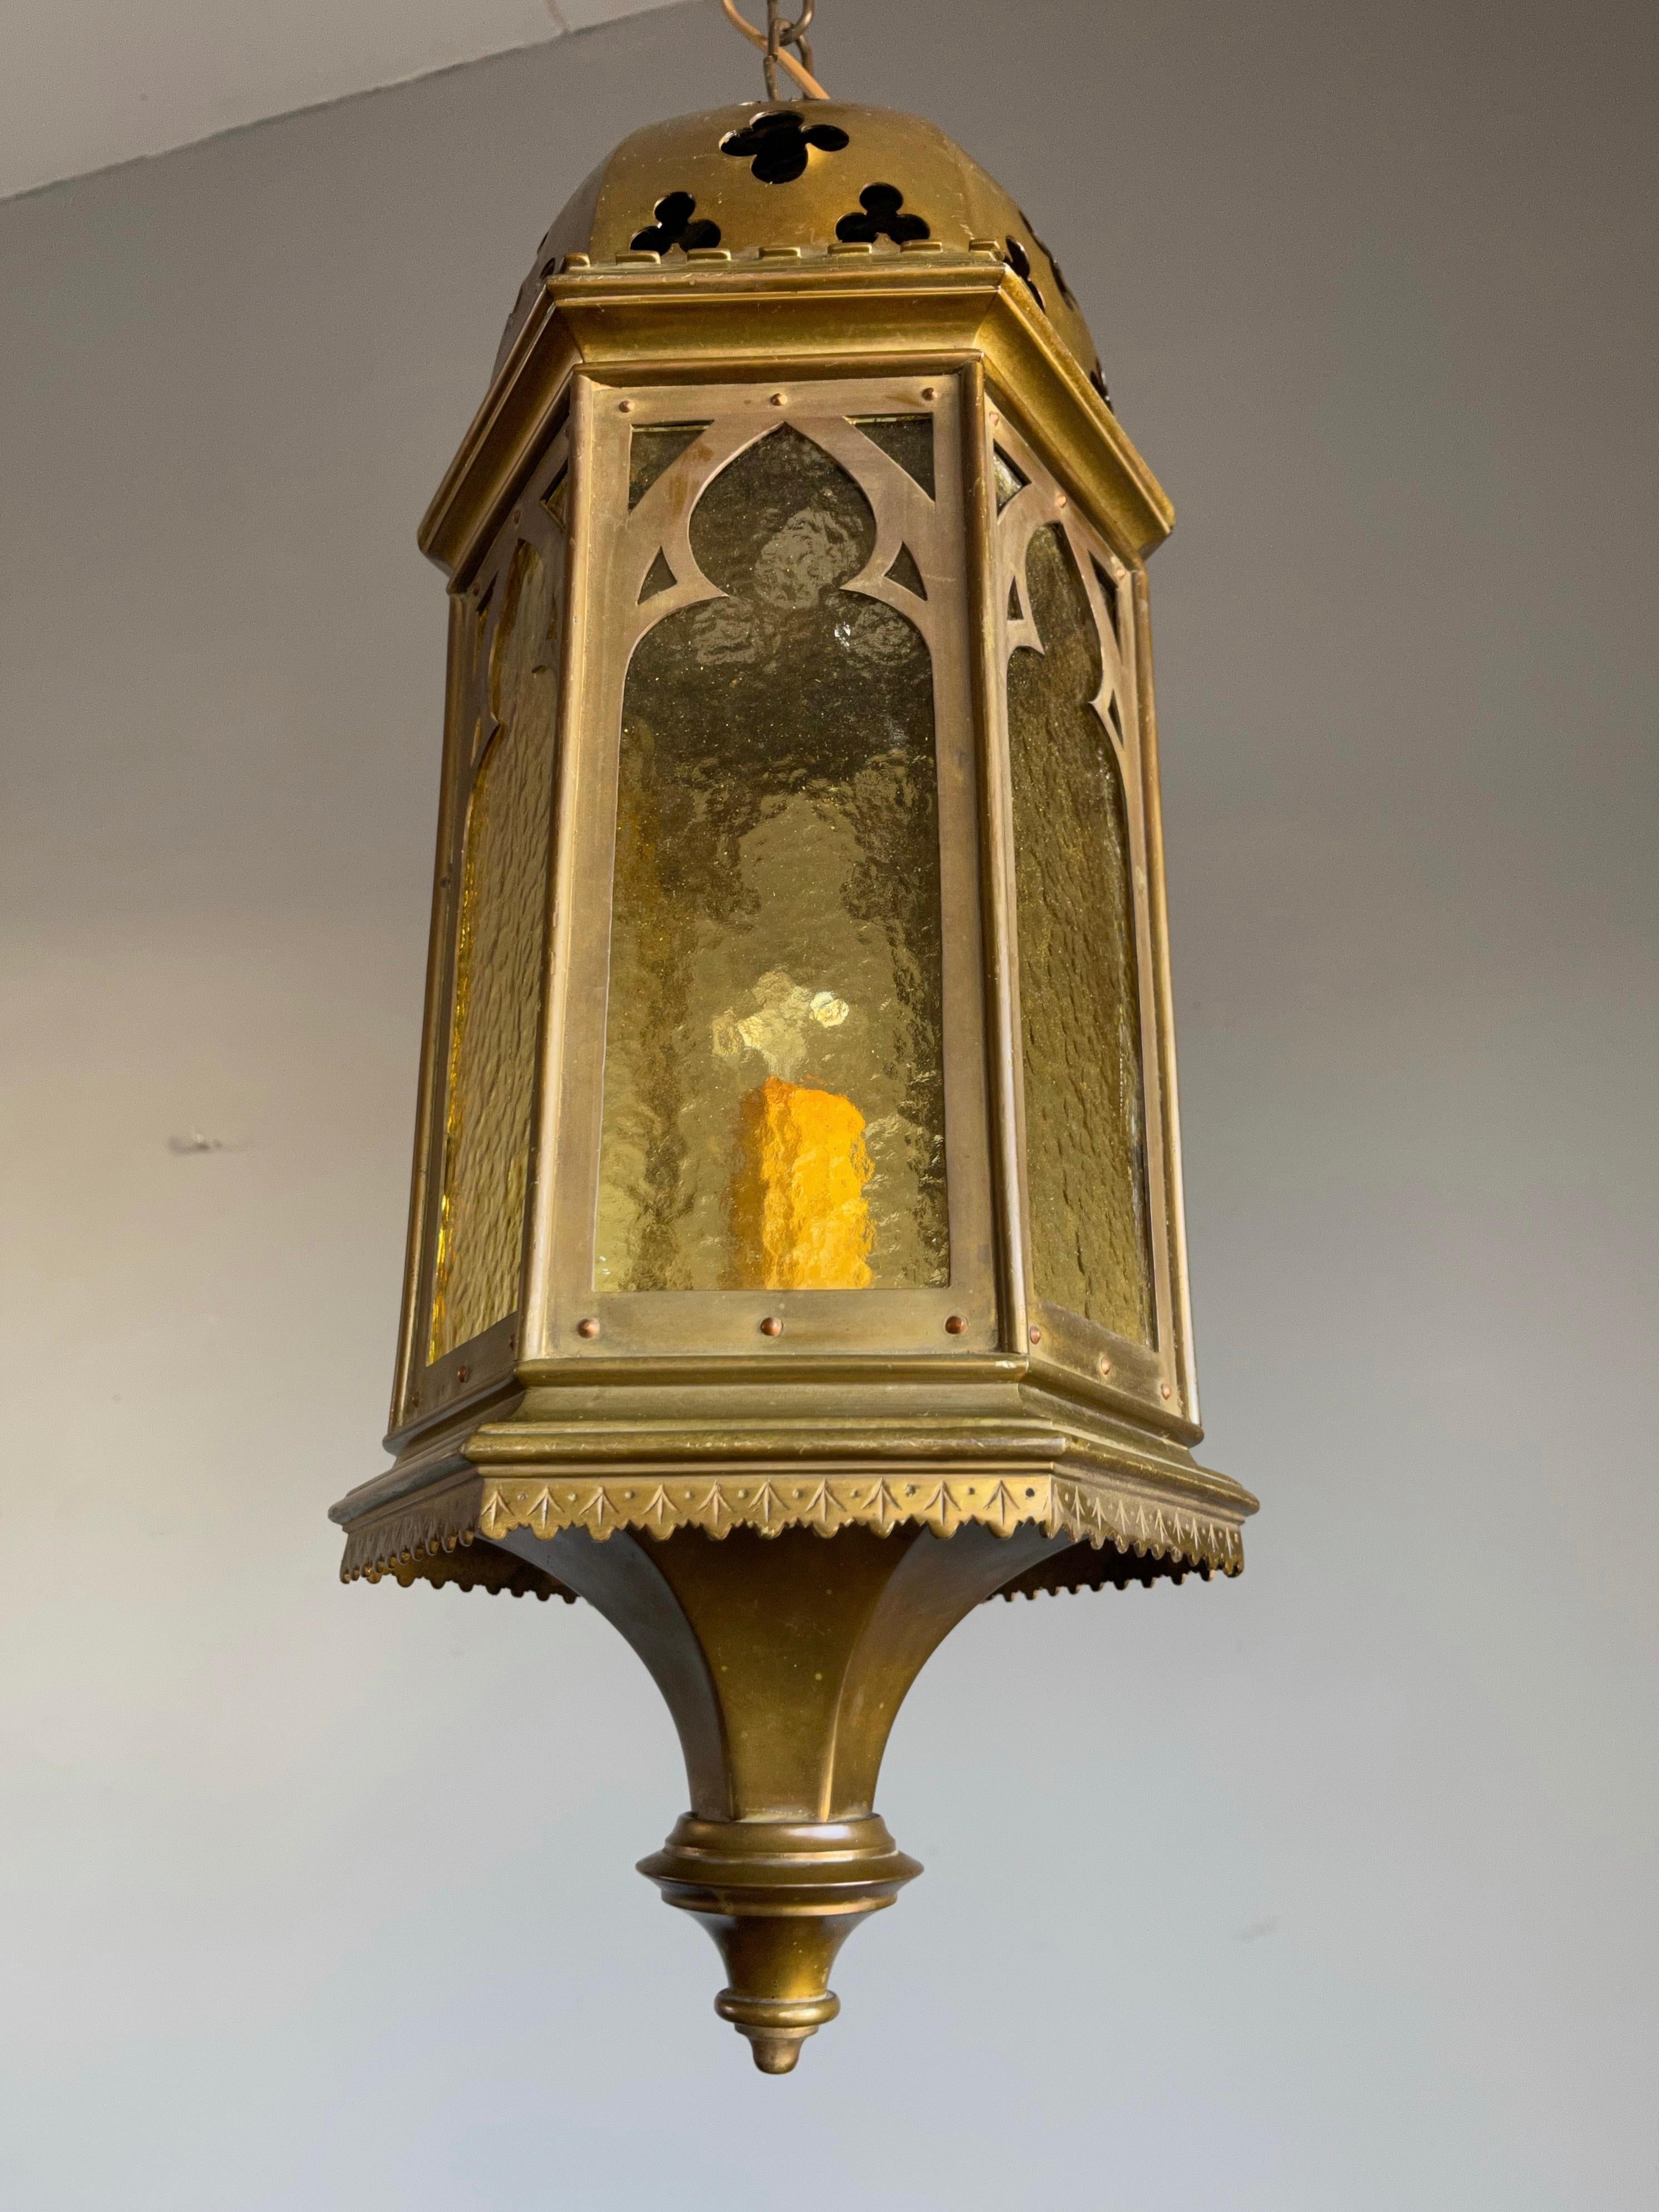 Rare Antique & Stylish Gothic Revival Brass Lantern with Cathedral Glass Windows 11